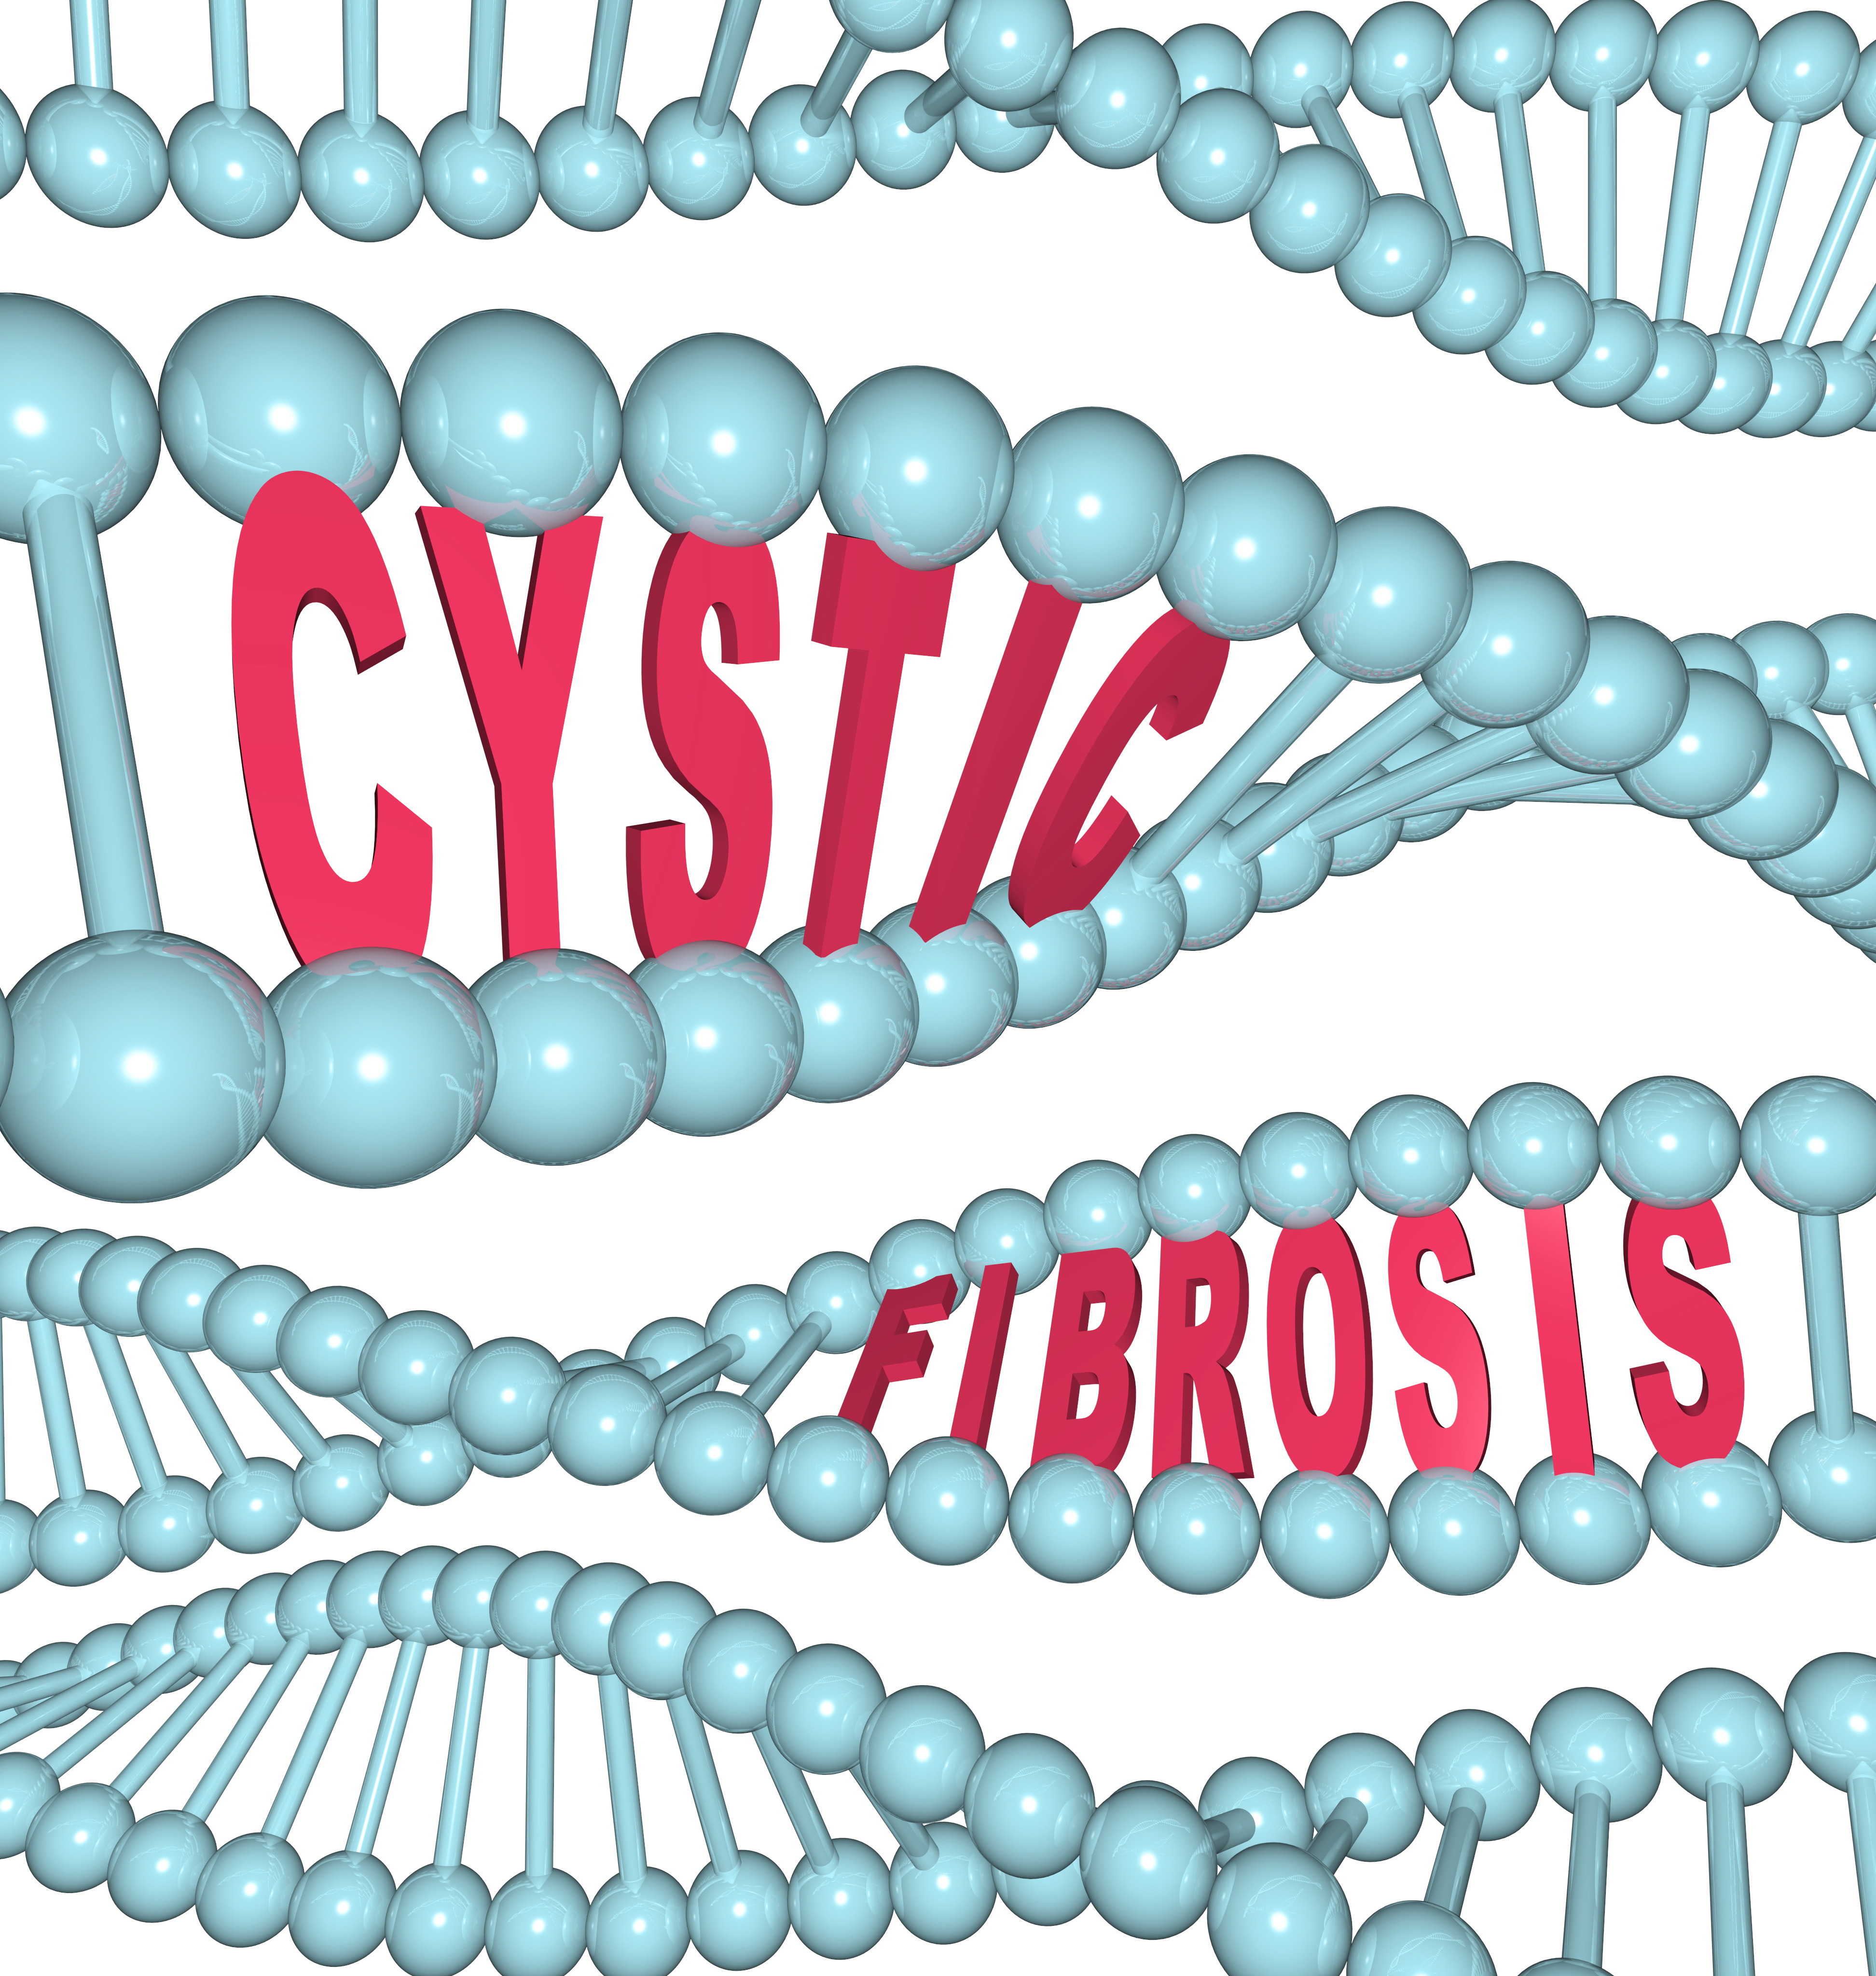 The words Cystic Fibrosis in strands of DNA